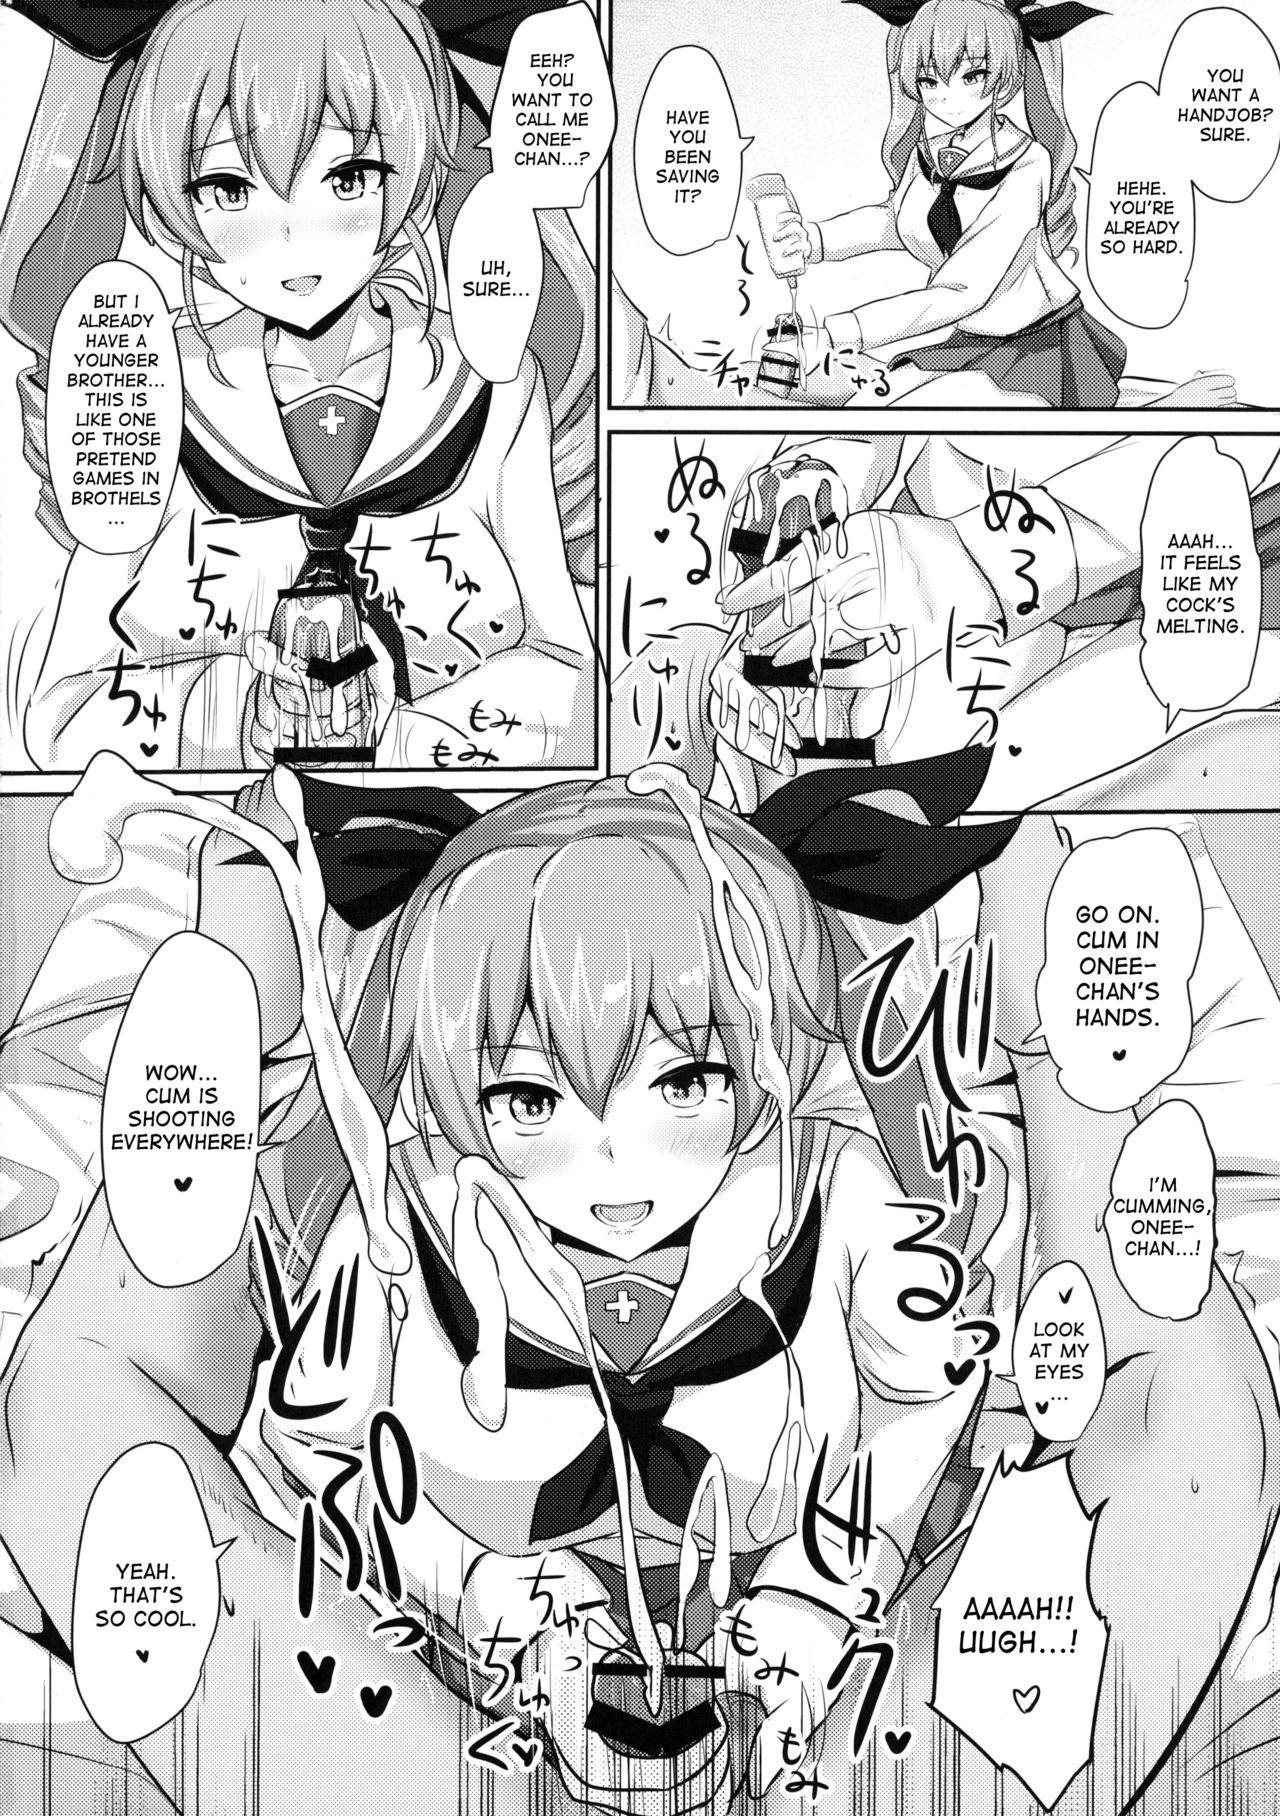 Lovers Anchovy Nee-san White Sauce Zoe - Girls und panzer Family - Page 5